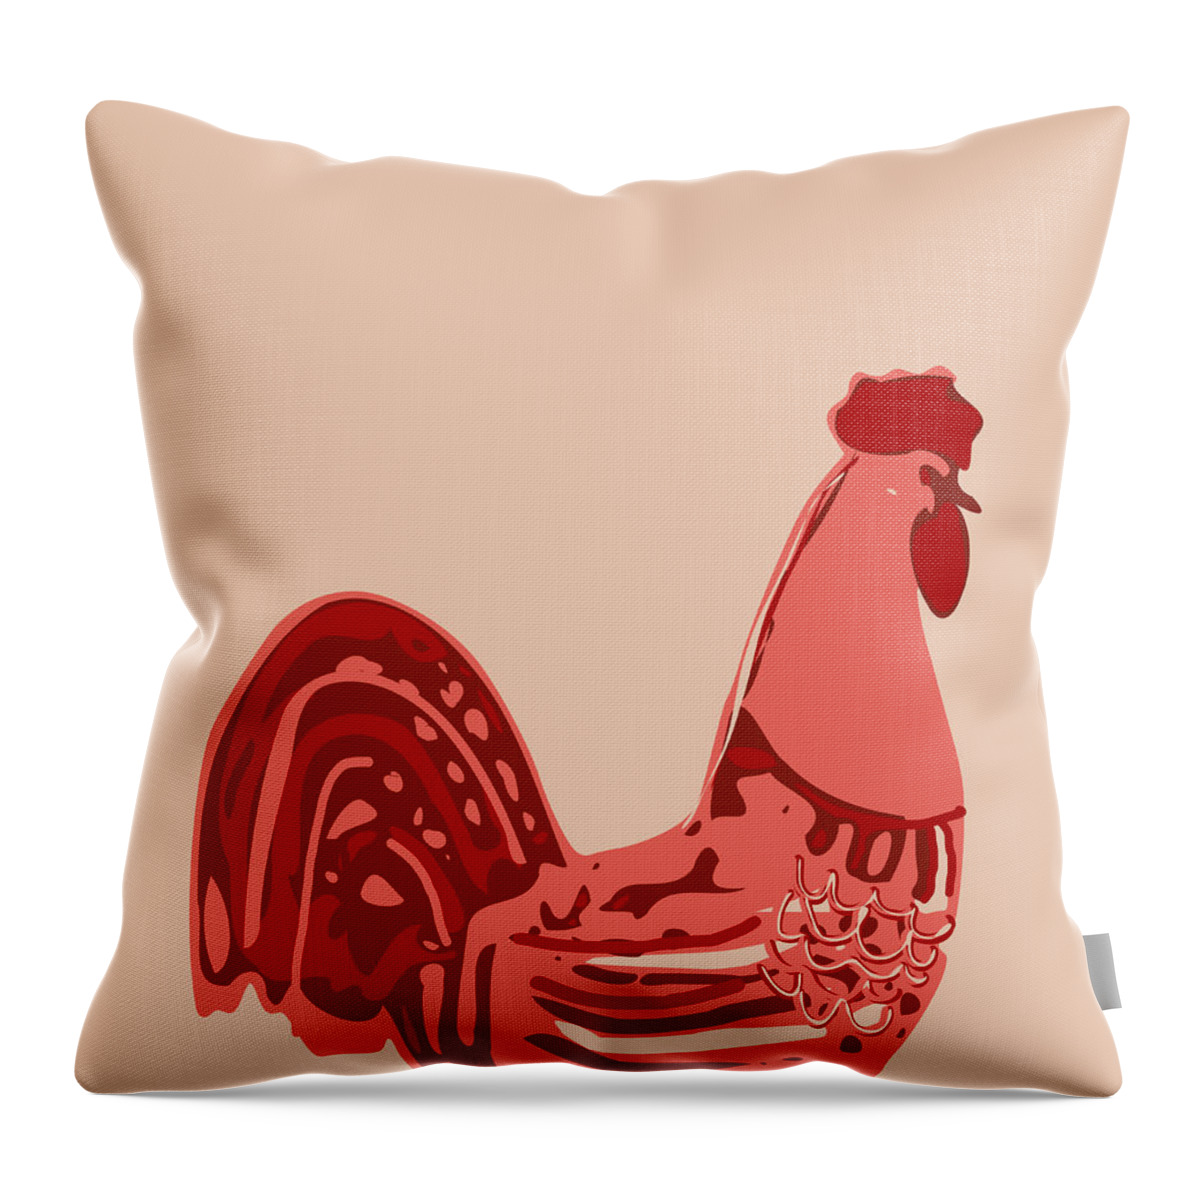 Animal Throw Pillow featuring the digital art Abstract Rooster Contours by Keshava Shukla